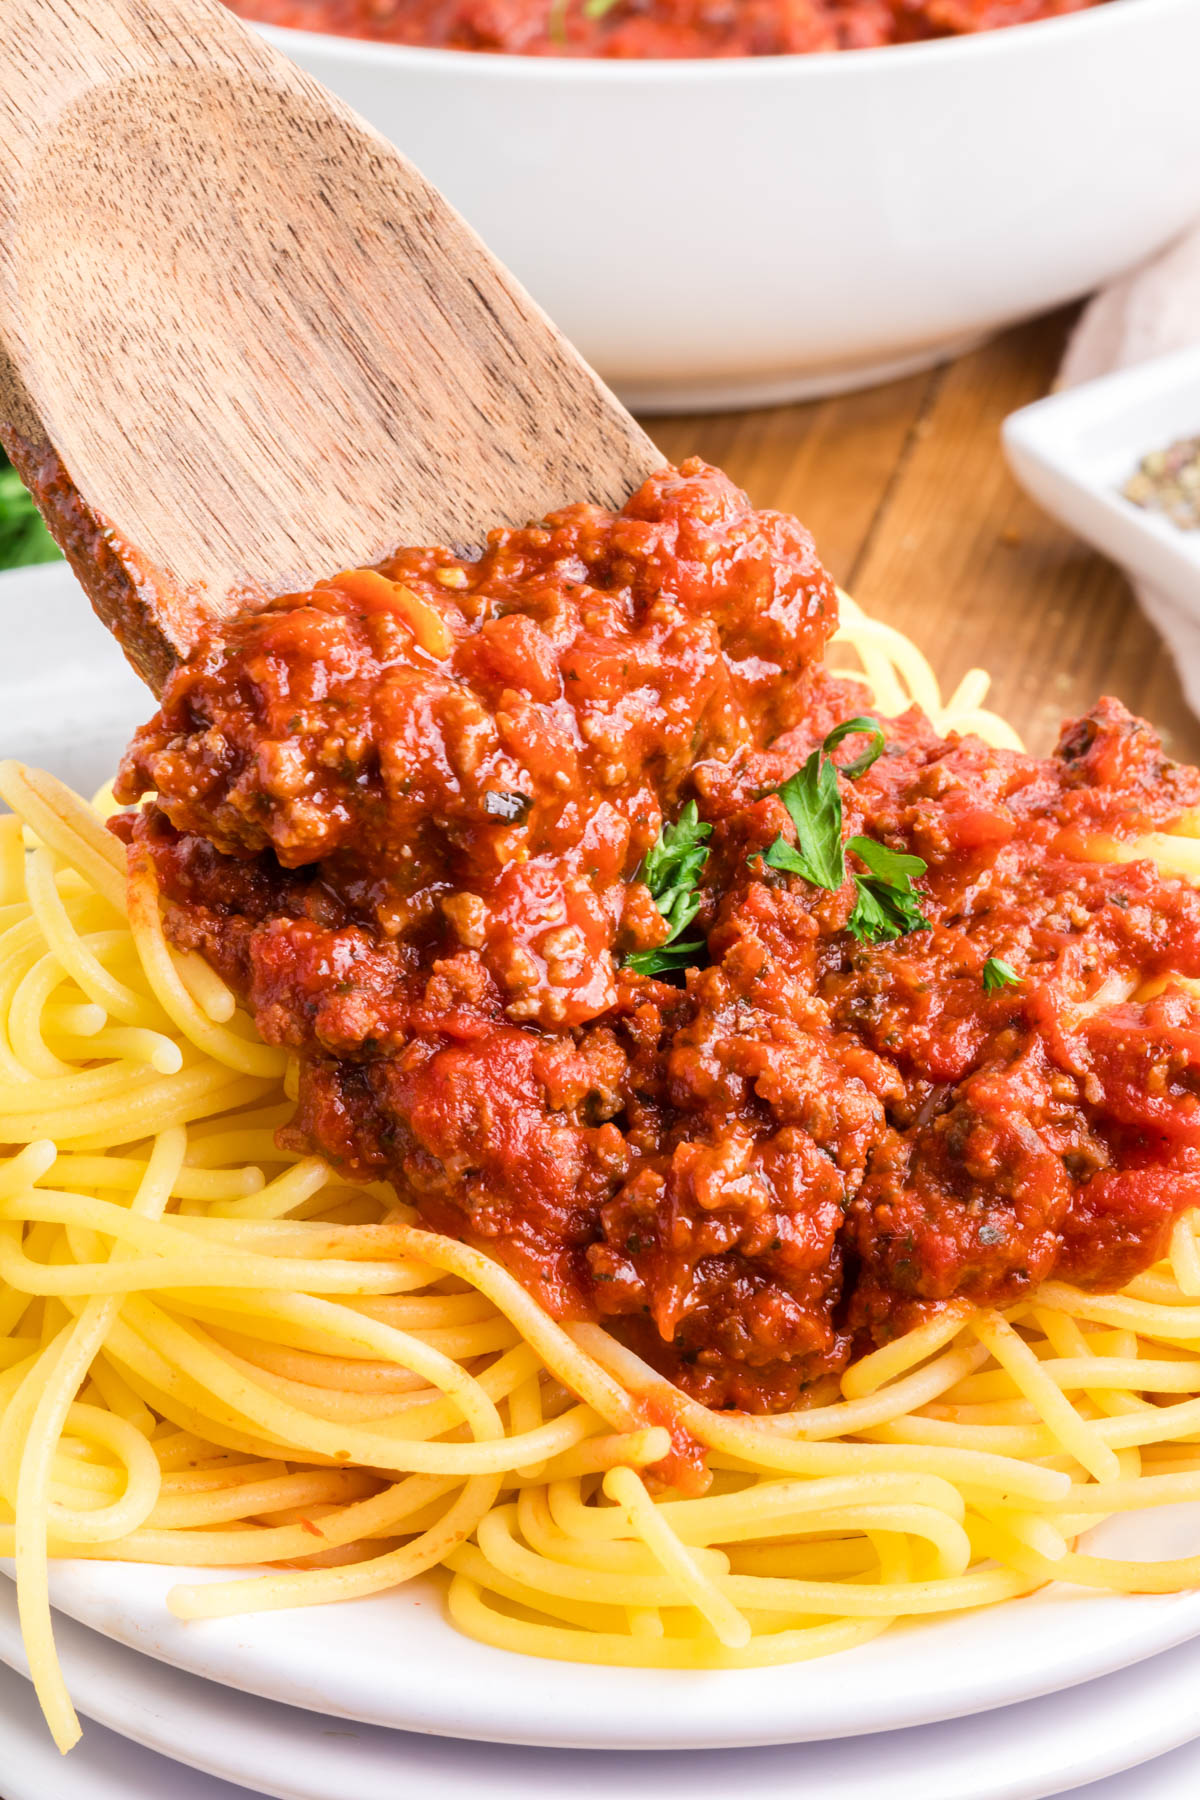 Spooning meat sauce onto cooked spaghetti.